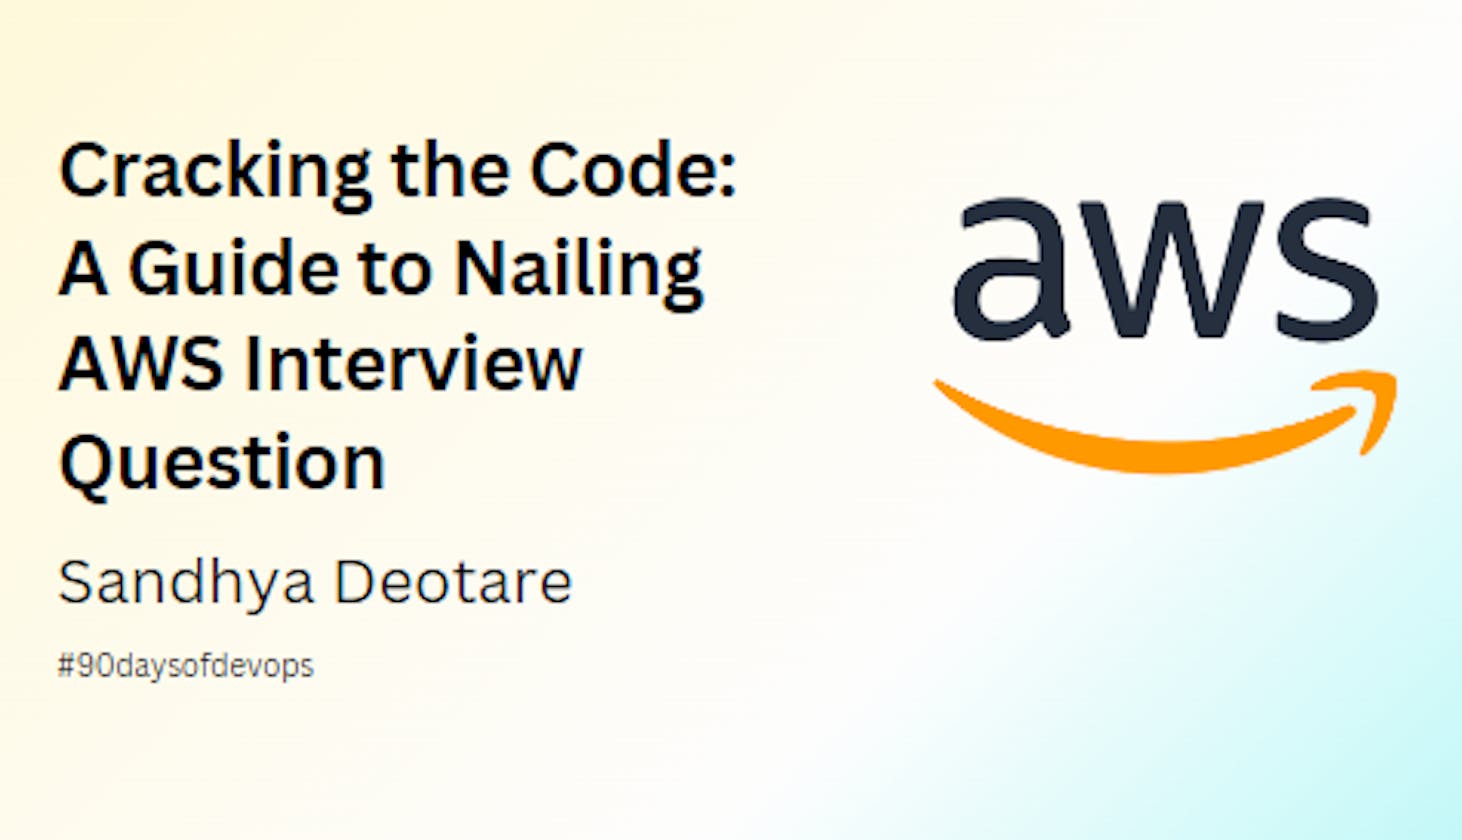 Cracking the Code: A Guide to Nailing AWS Interview Questions